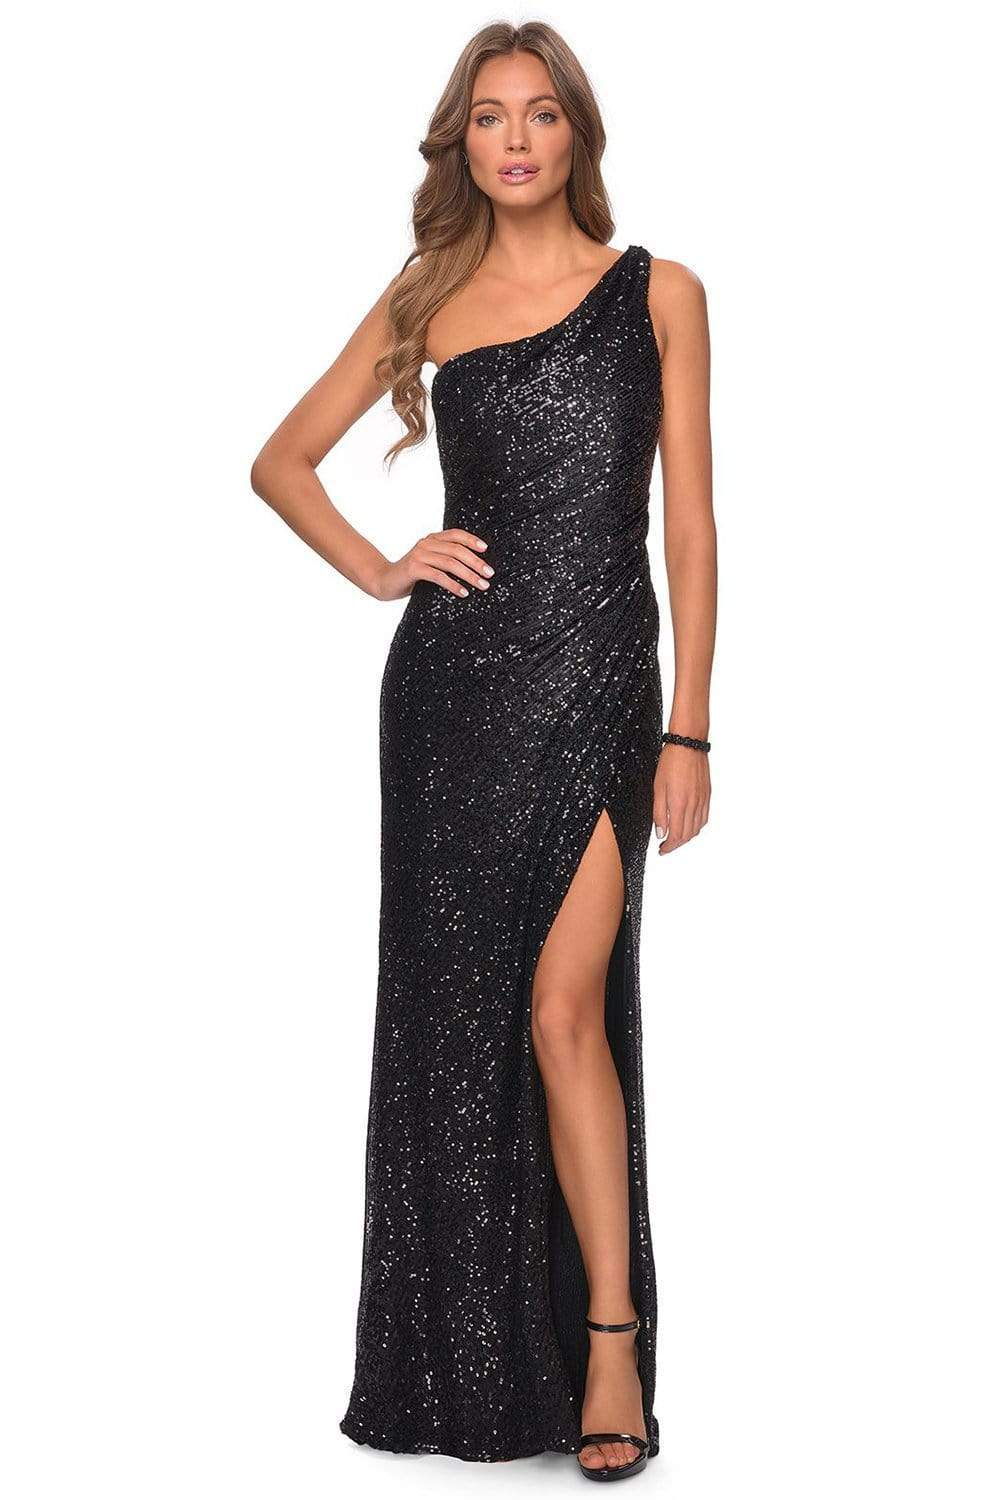 Image of La Femme - 28401 Asymmetrical Textured Sequined Dress with Slit